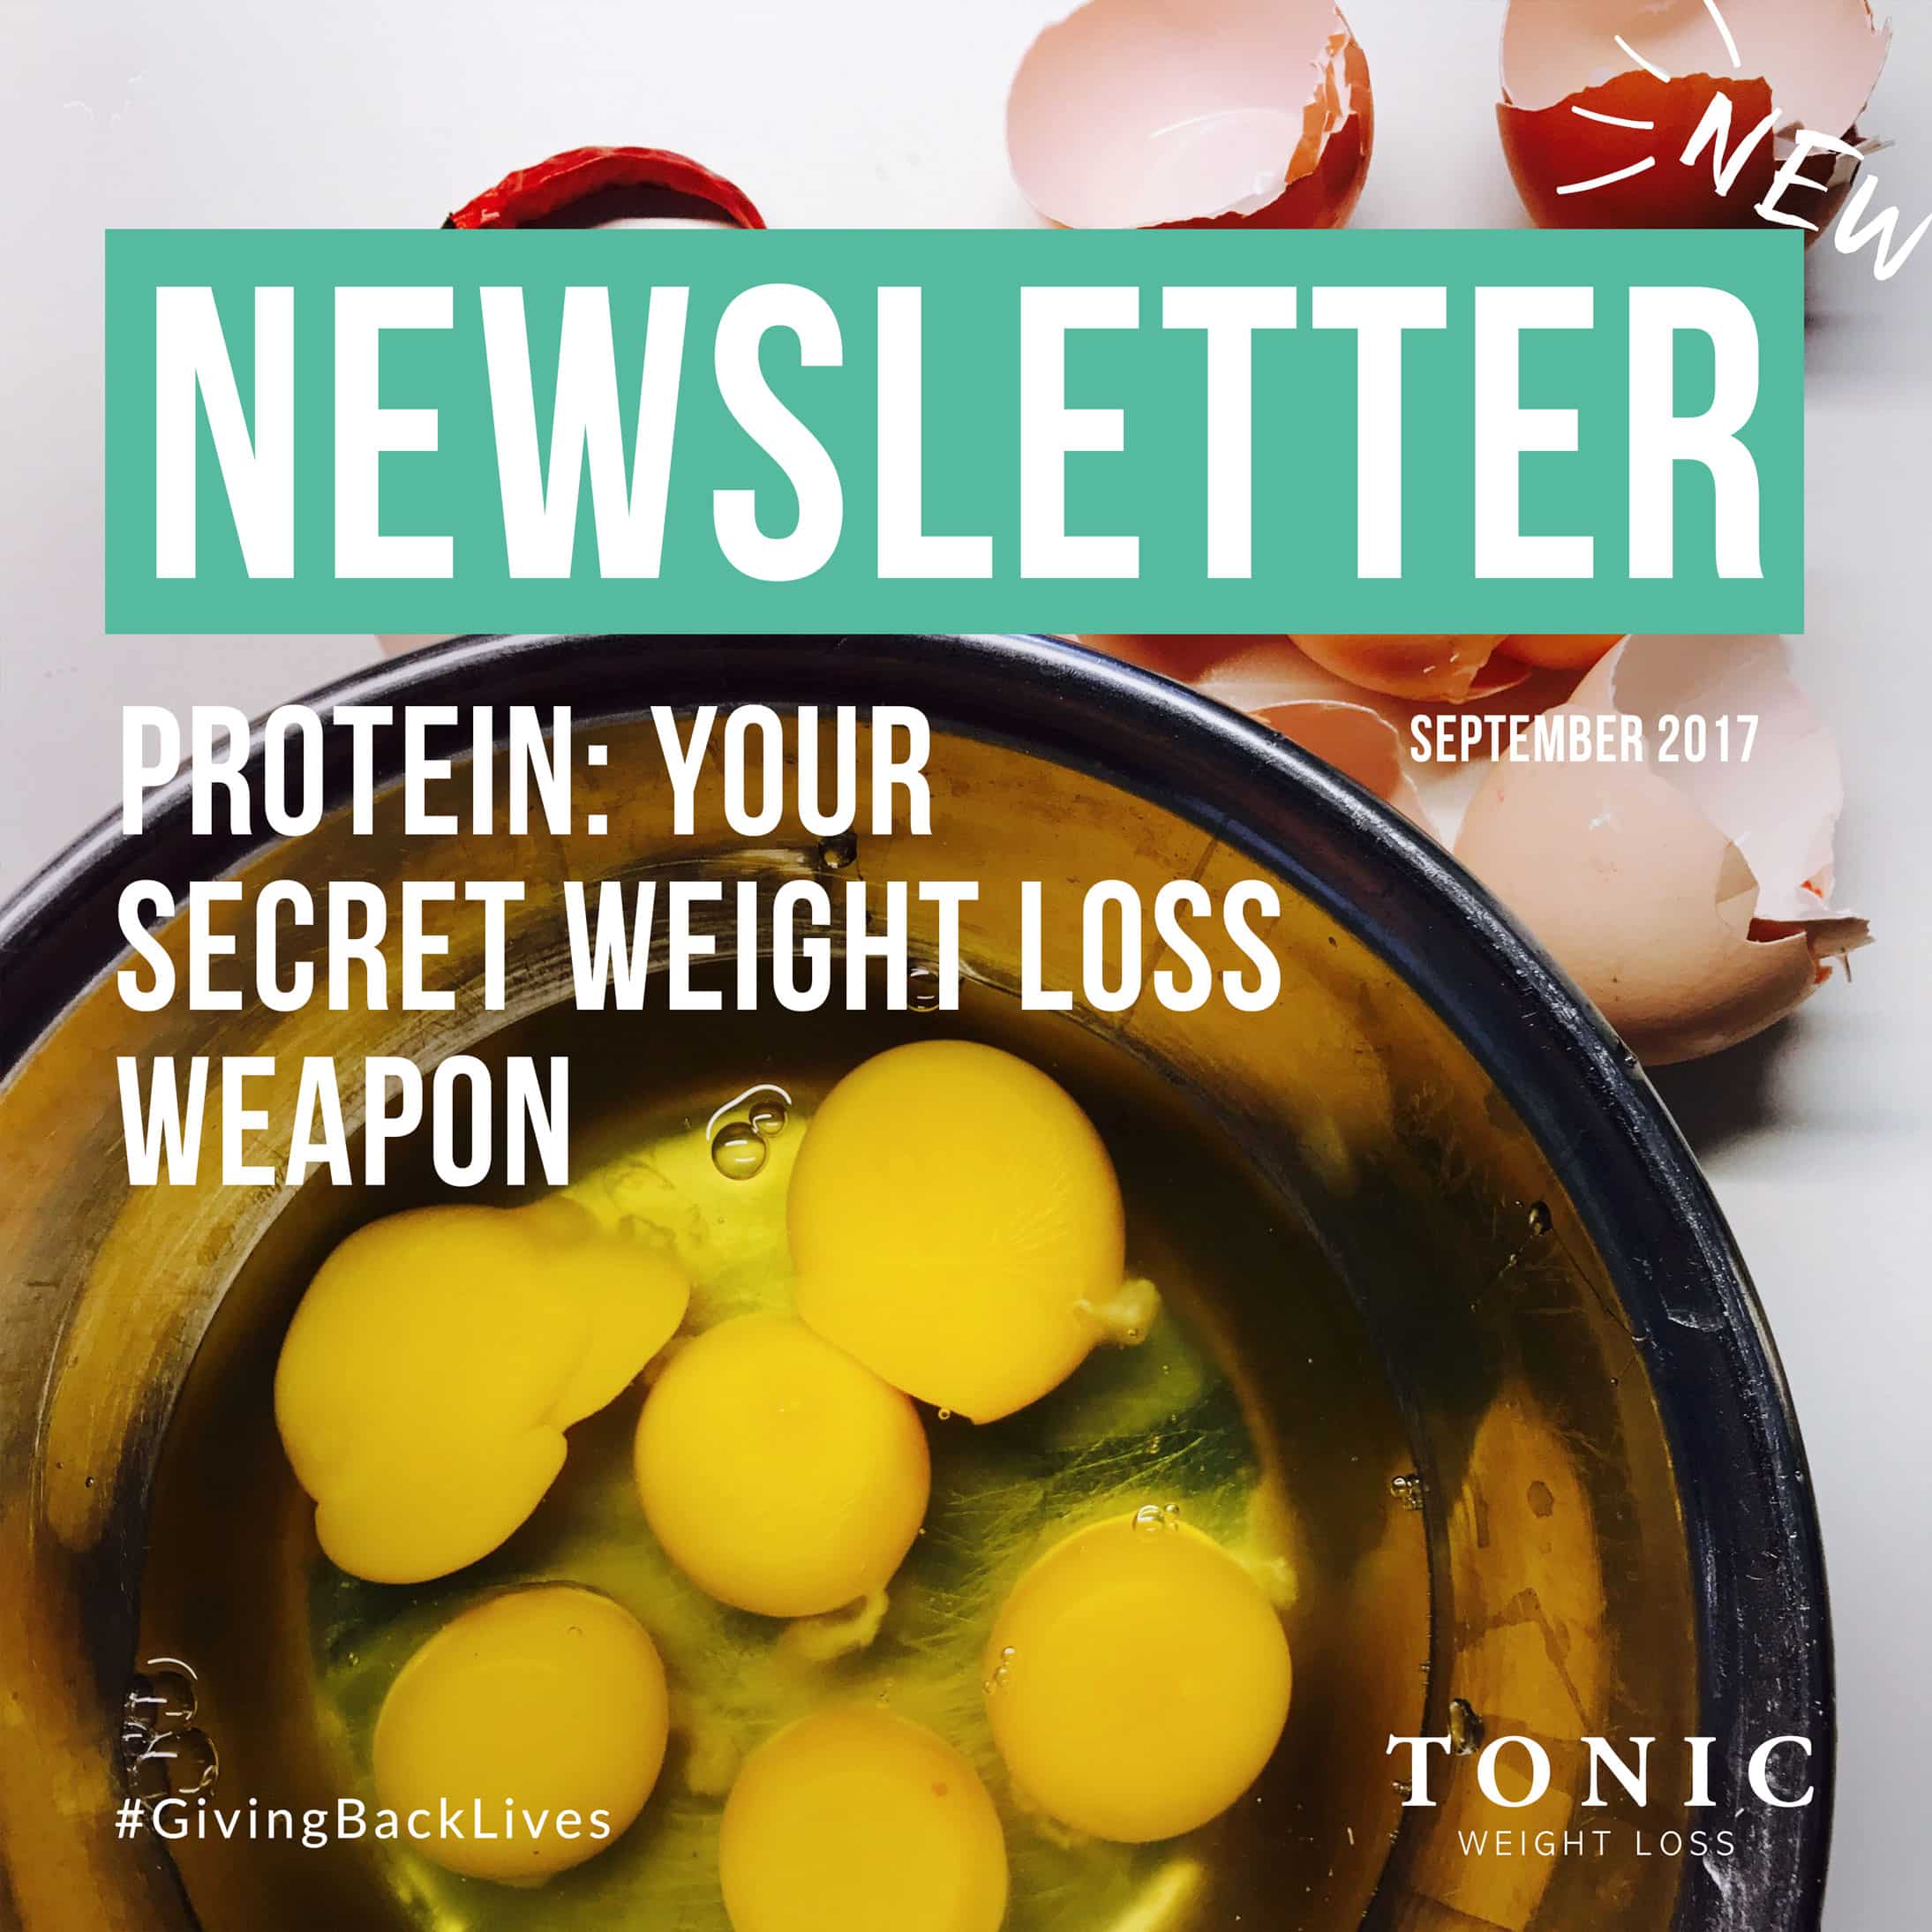 Tonic-Newletter-protein-your-secret-weight-loss-weapon